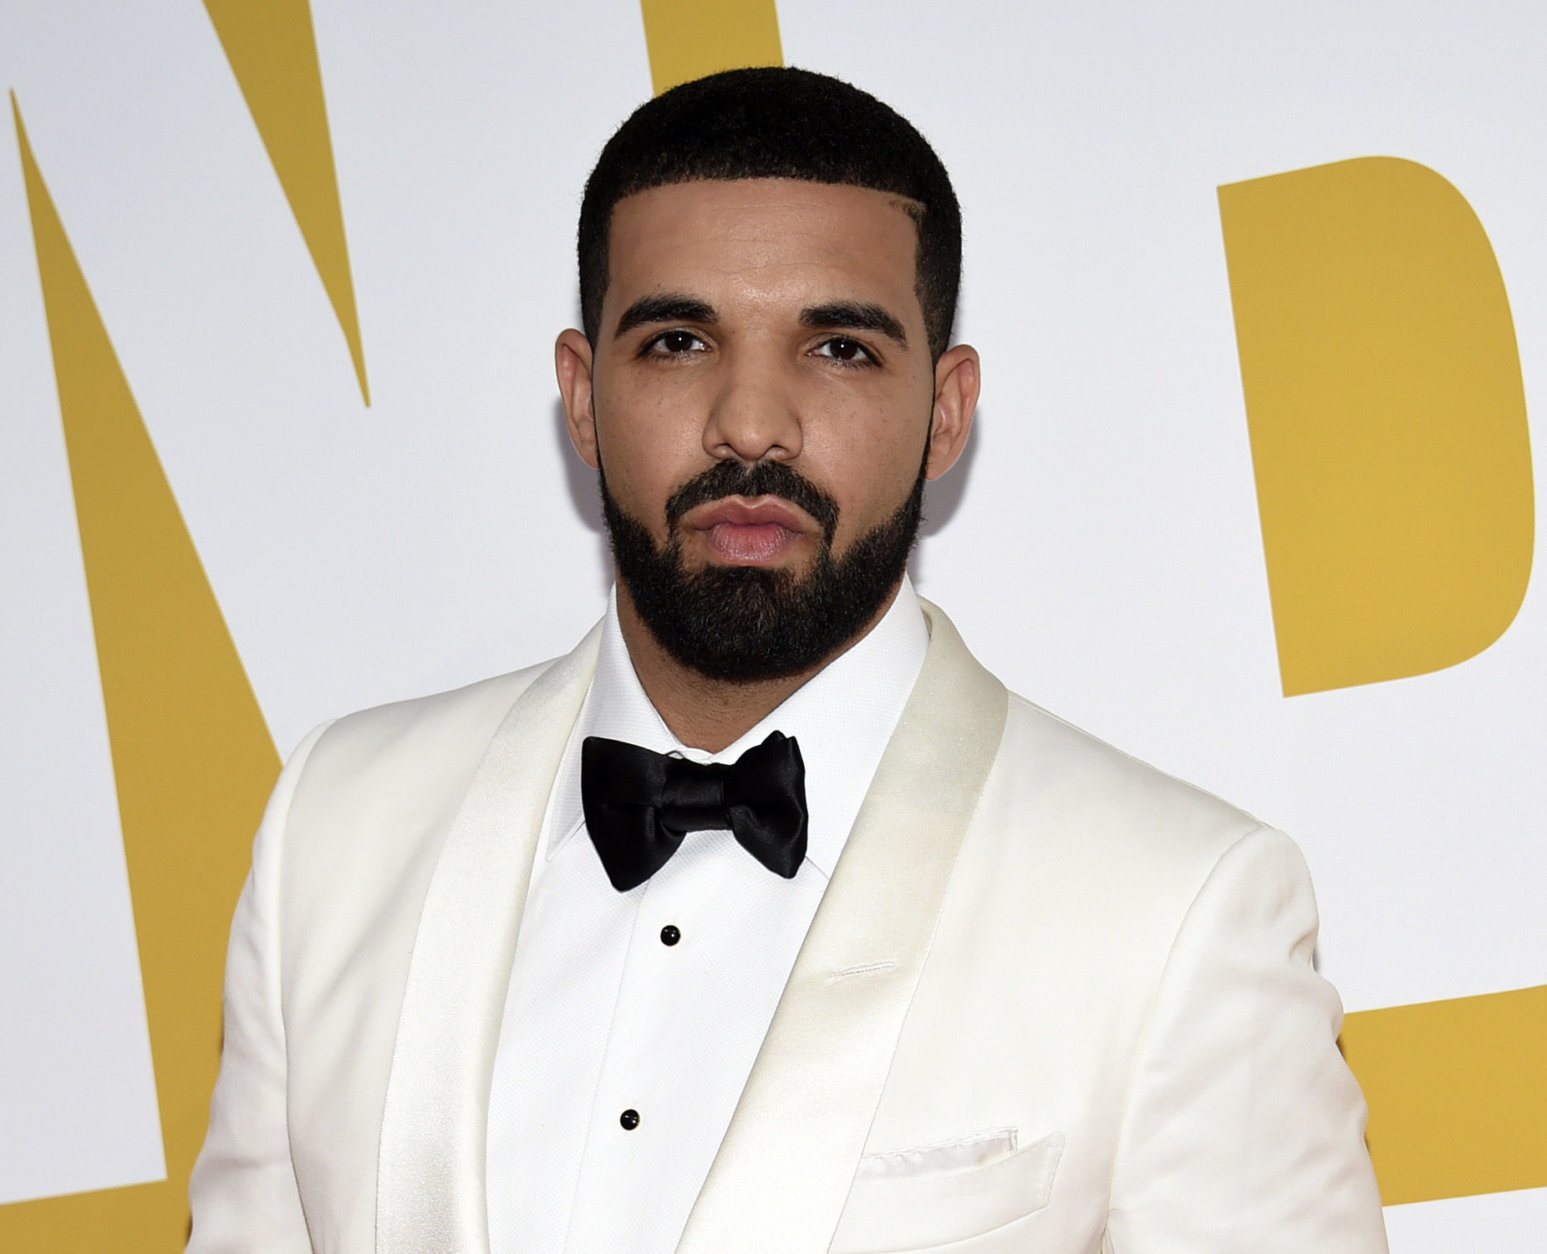 FILE - In this June 26, 2017, file photo, Canadian rapper Drake arrives at the NBA Awards in New York. Drake is going on tour. He announced the Aubrey and The Three Amigos tour on Monday, May 14, 2018. Drake will be joined by “Walk It Talk It” collaborators Migos and special guests on the North American leg through the summer and fall. (Photo by Evan Agostini/Invision/AP, File)